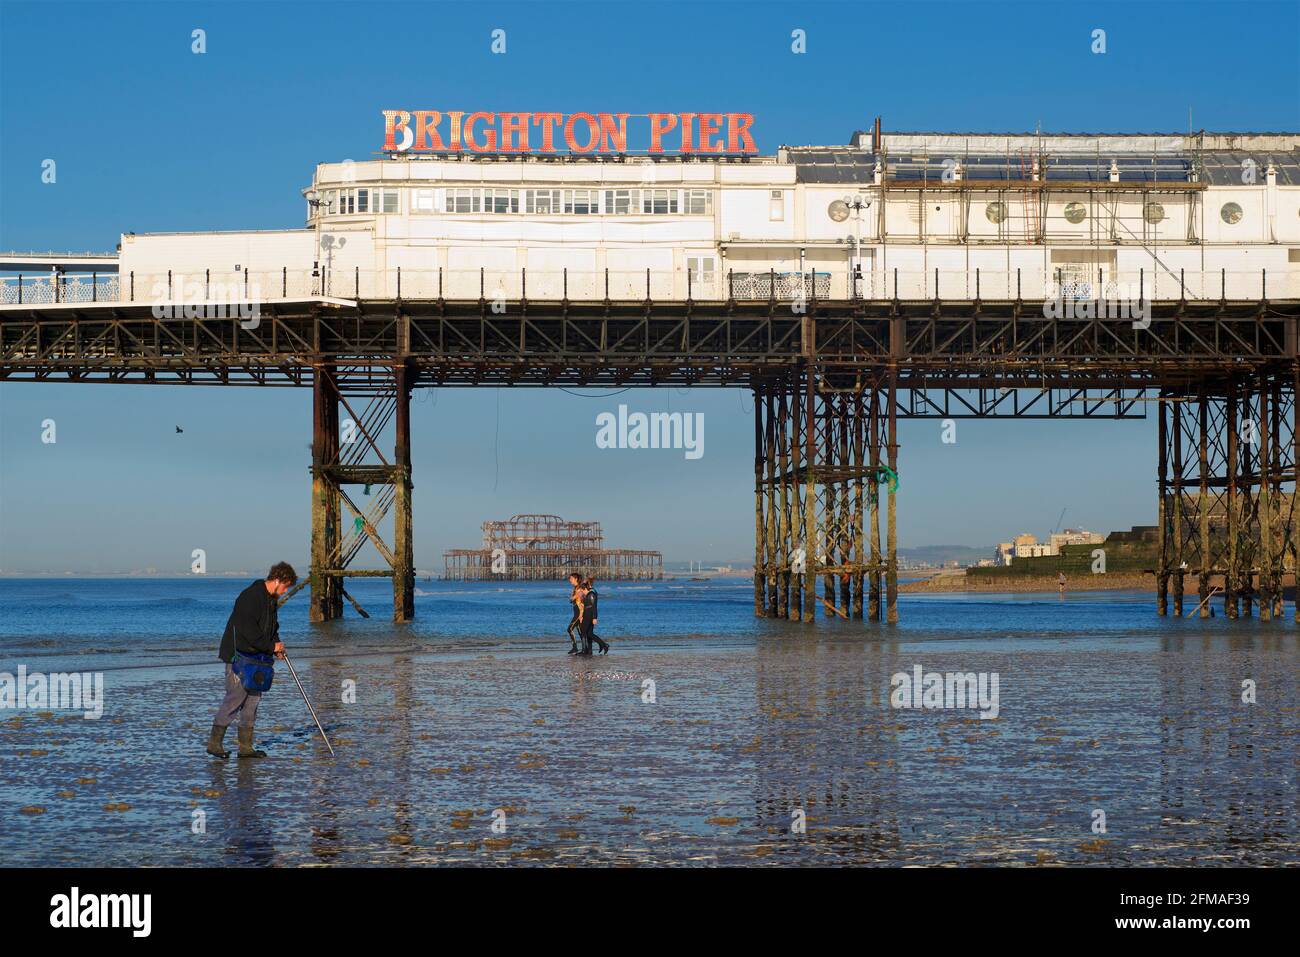 Brighton's dilapidated West Pier framed in the structure of 'Brighton Pier', the Palace Pier. Fisherman collecting ragworm for bait in the foreground, women going for a swim behind. Stock Photo